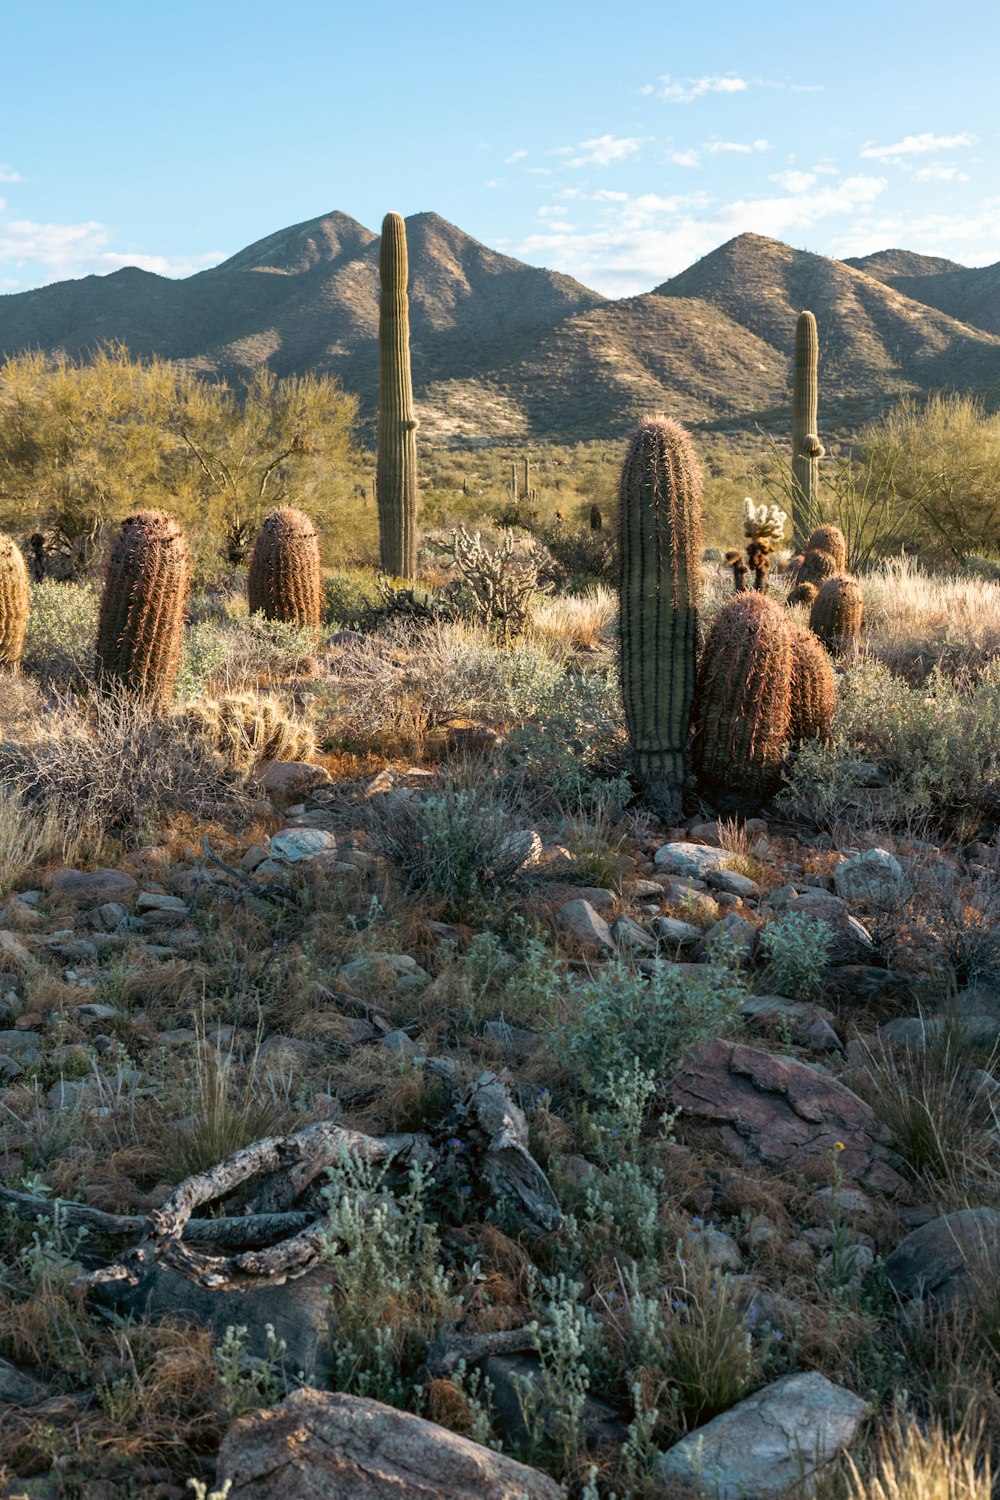 a group of cacti in the desert with mountains in the background